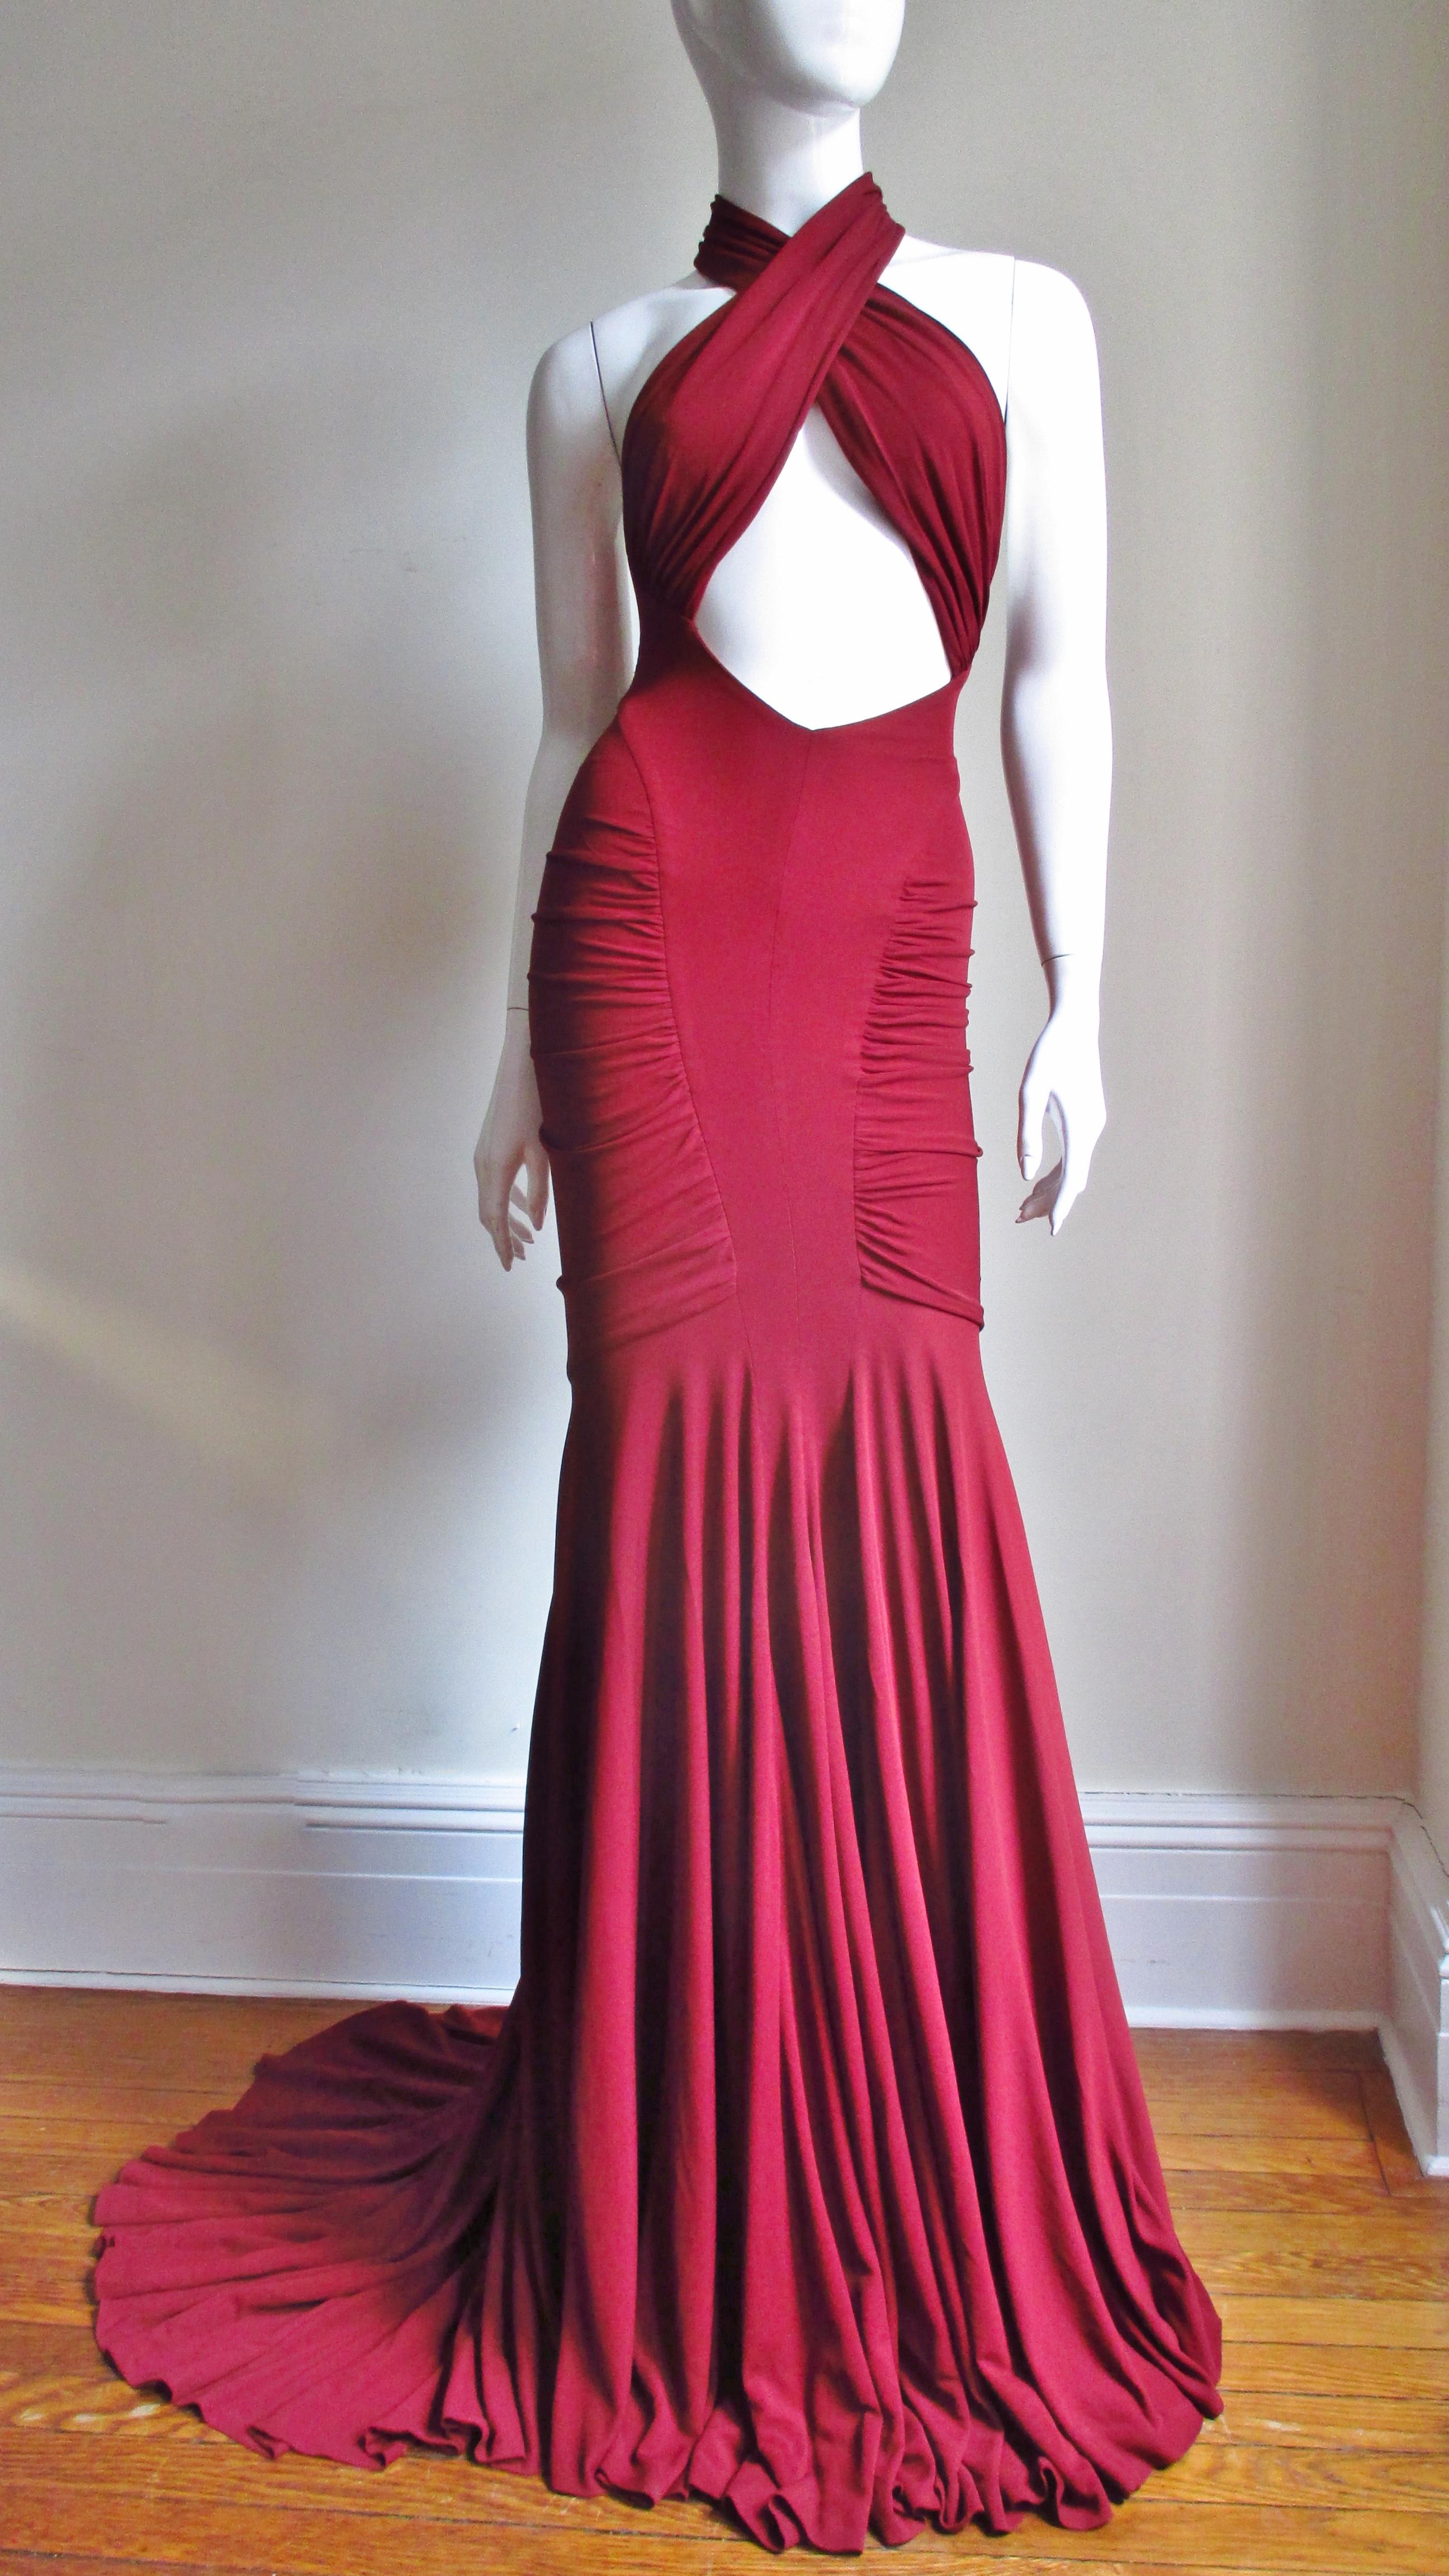 An absolutely stunning gown by Herve Leger for Guy Laroche 2005 Collection with all of the attention to the body conscious fit he is famous for. It is an incredible design in burgundy red silk jersey with a wrap, cross ruched front bodice leaving a